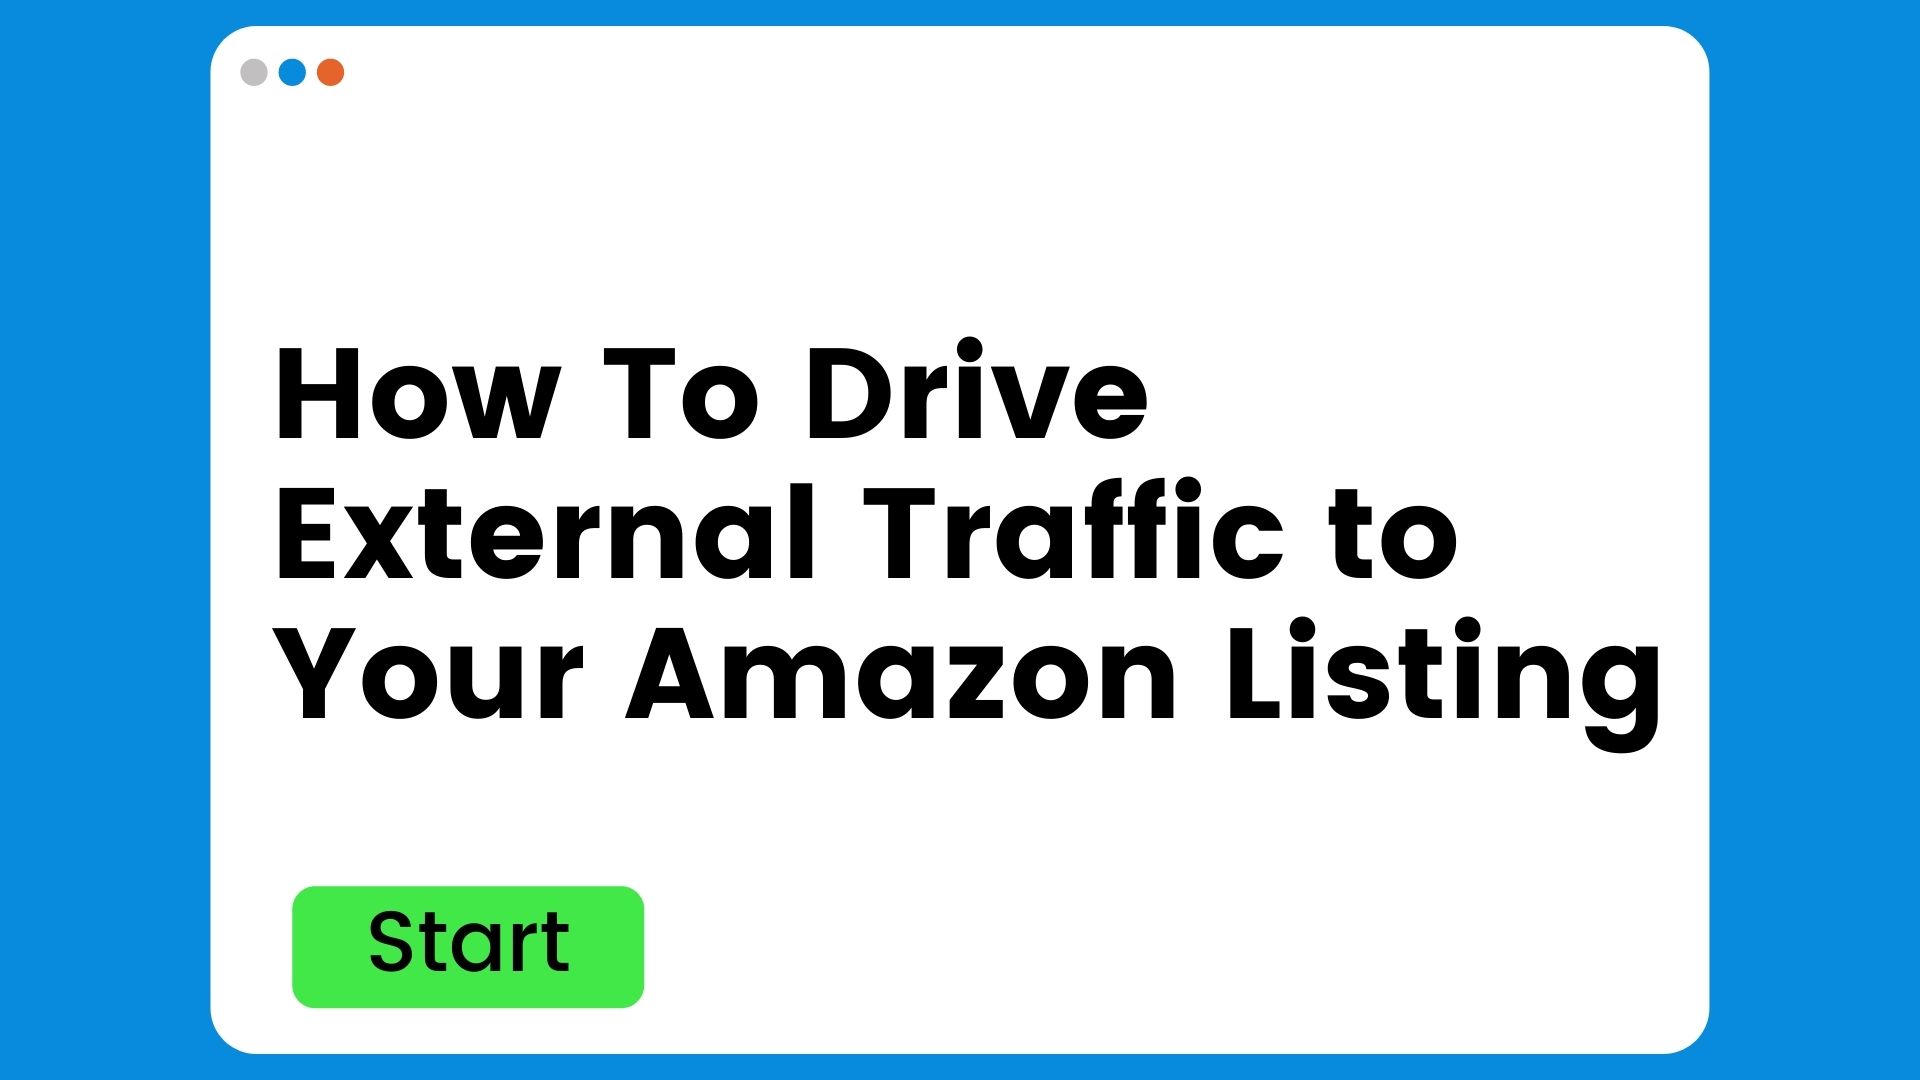 How to Drive External Traffic to Your Amazon Listing